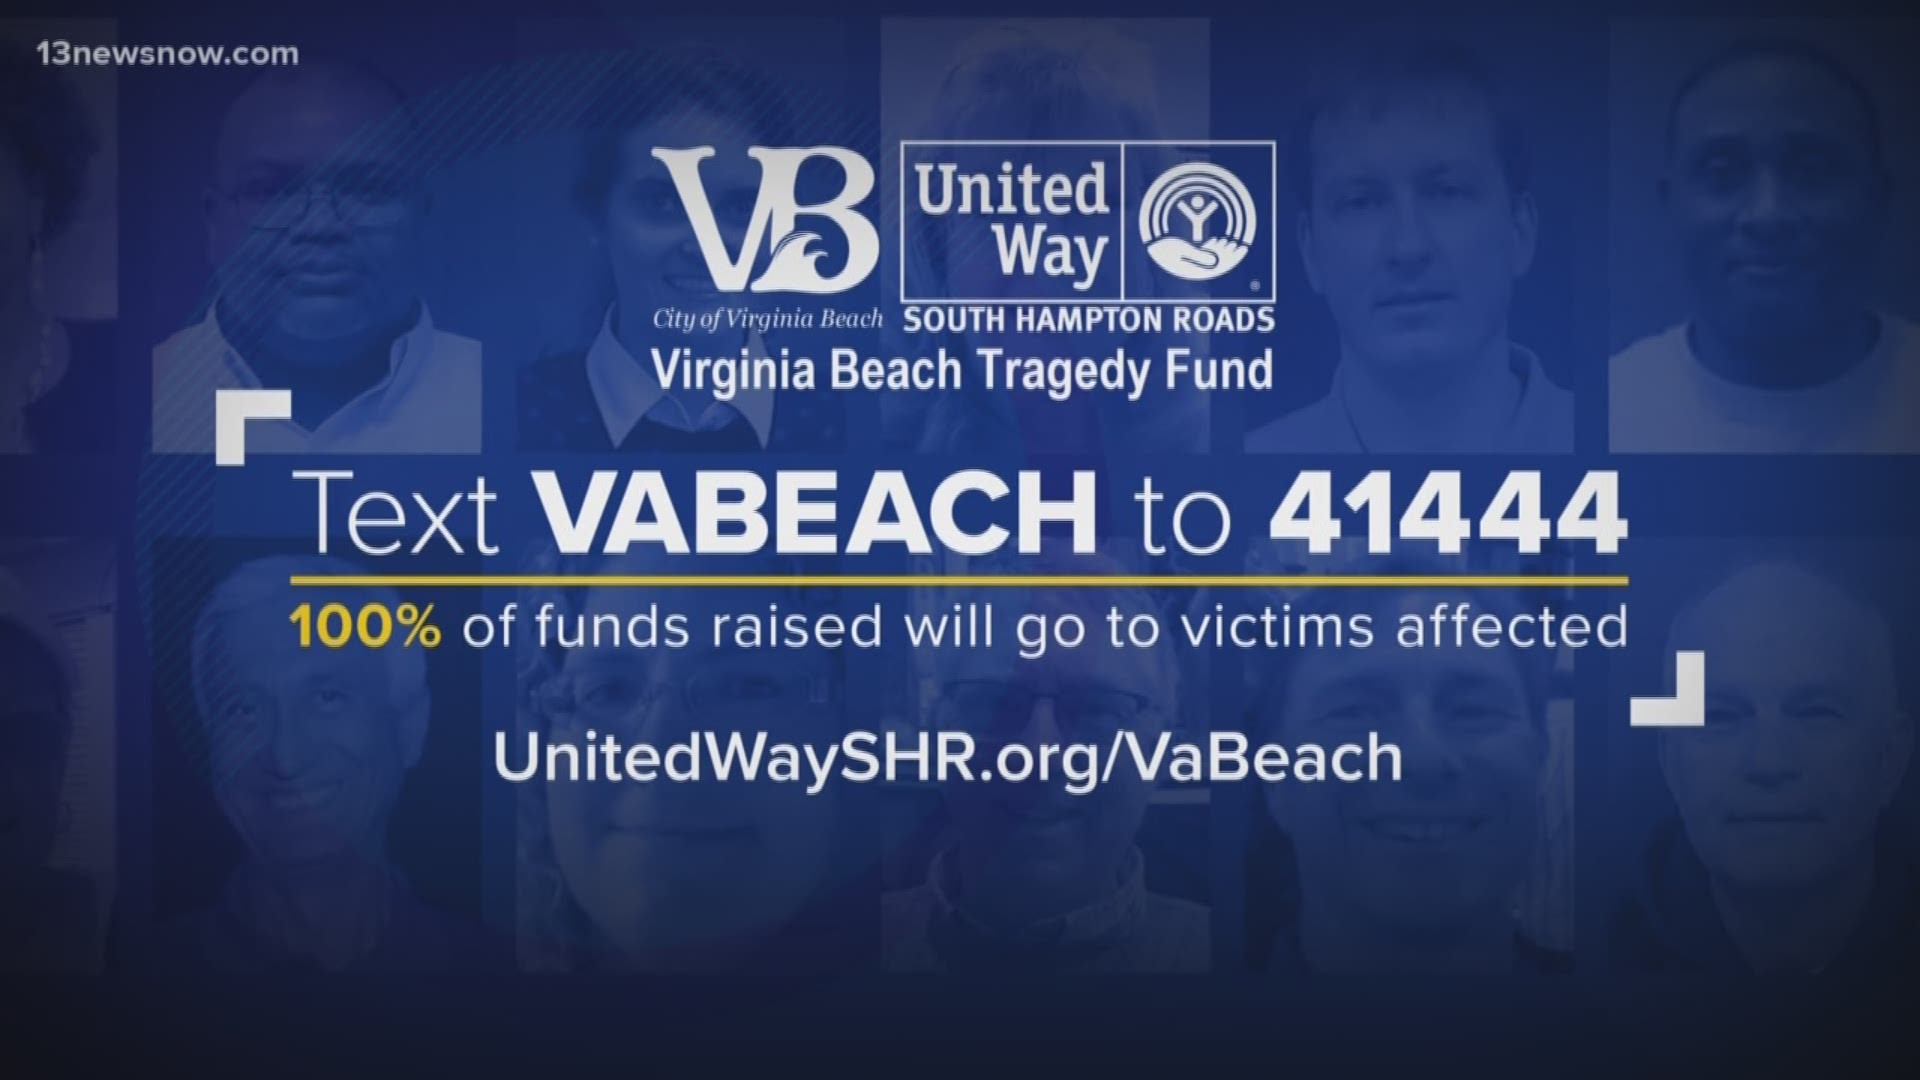 So far, United Way of South Hampton Roads has collected almost $3 million for the victims and their families of the Municipal Center shooting.